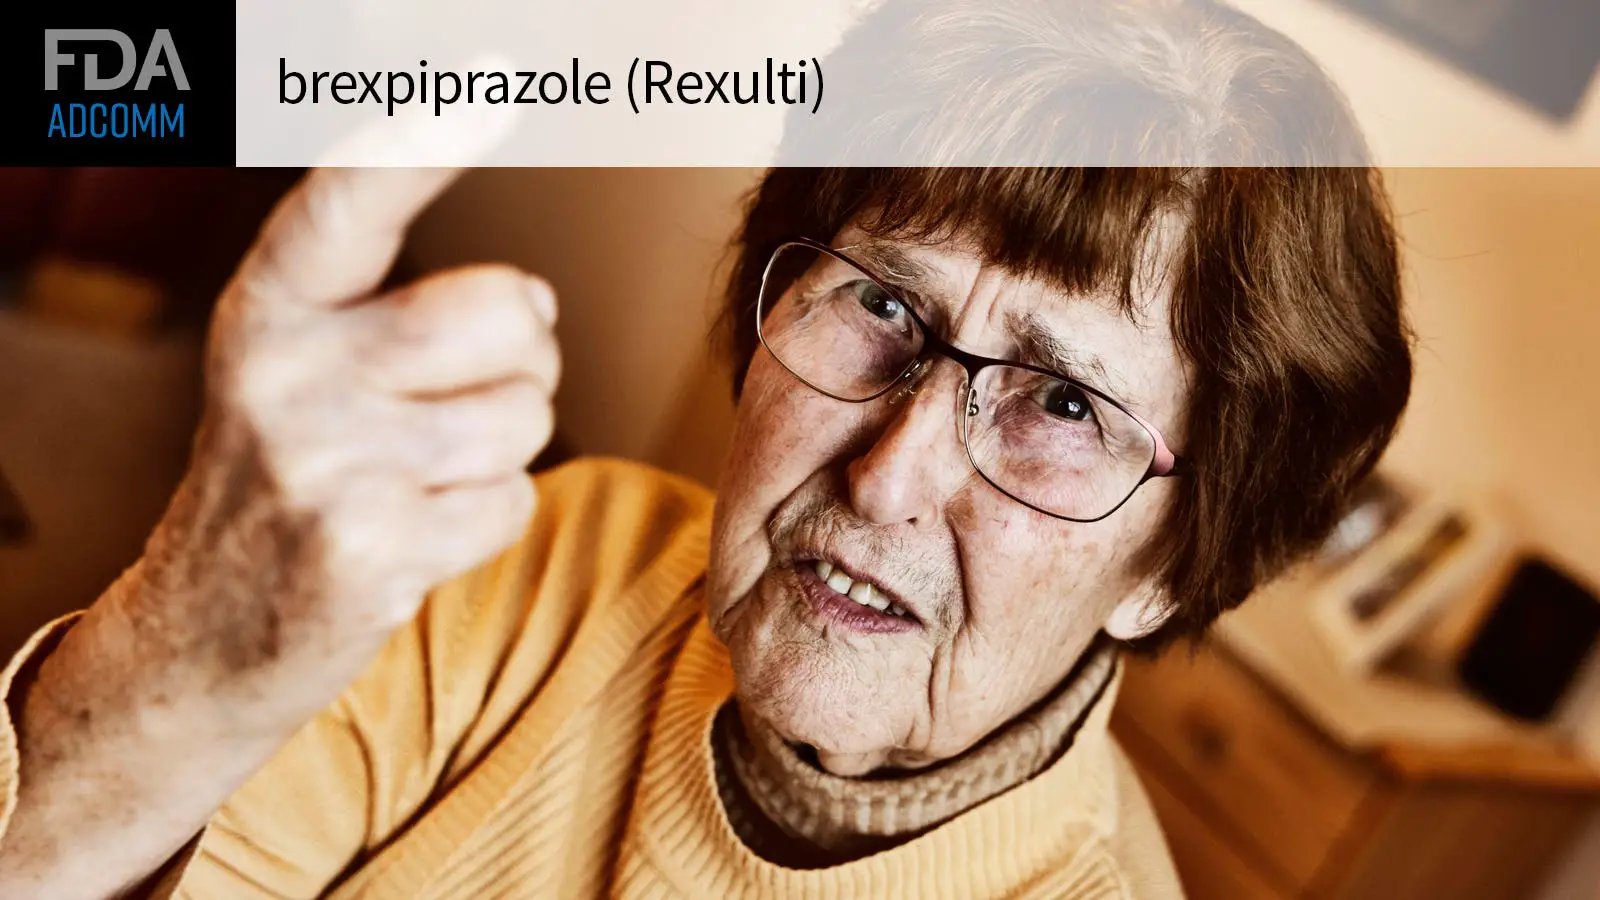 FDA ADCOMM brexpiprazole (Rexulti) over a photo of an agitated senior woman rising her index finger.